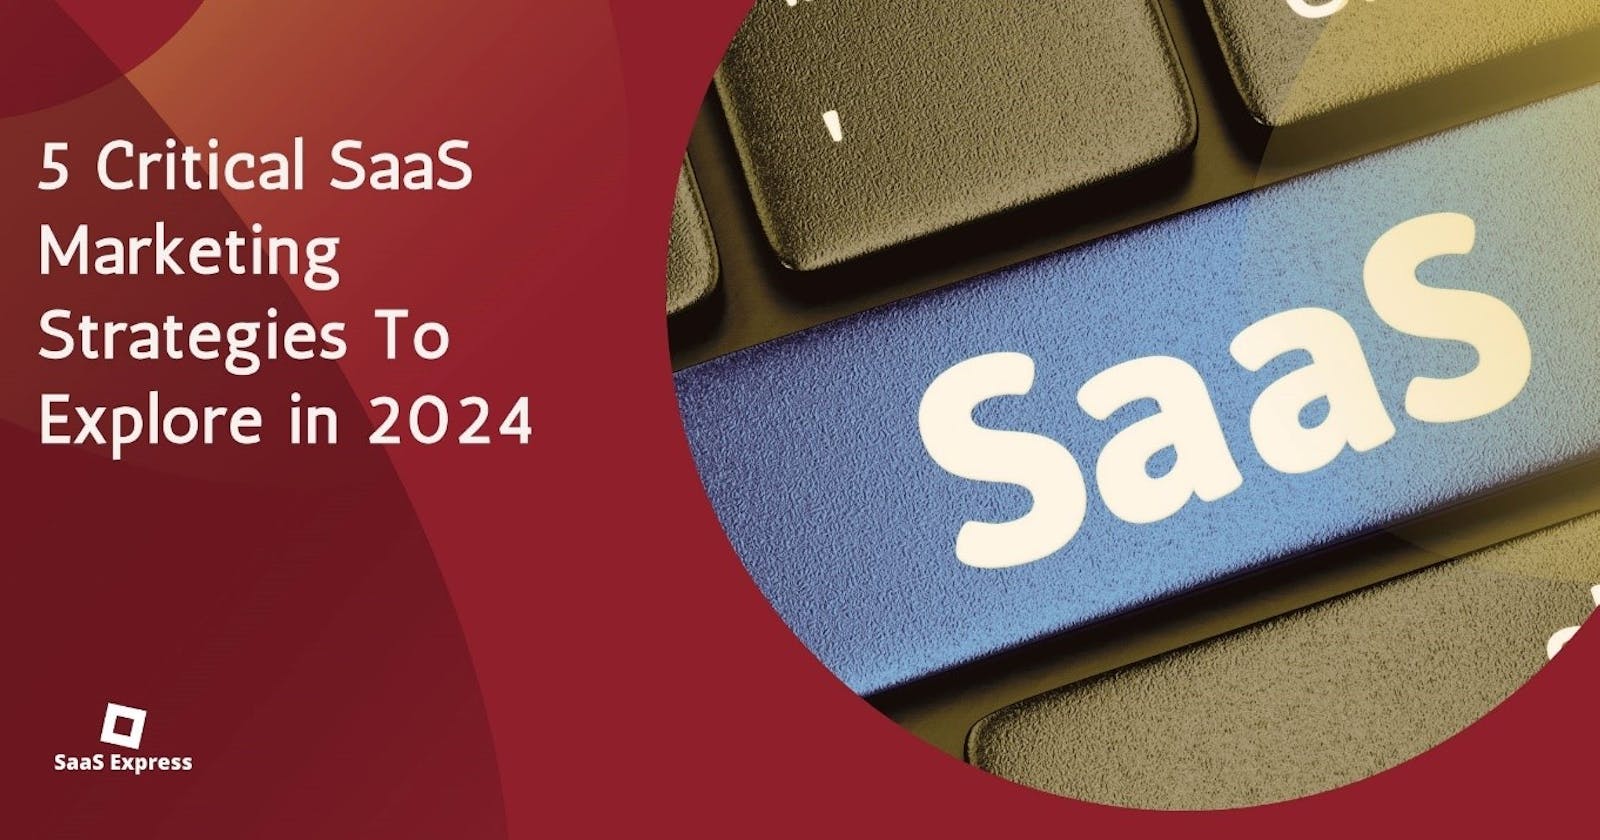 5 Critical SaaS Marketing Strategies To Explore in 2024